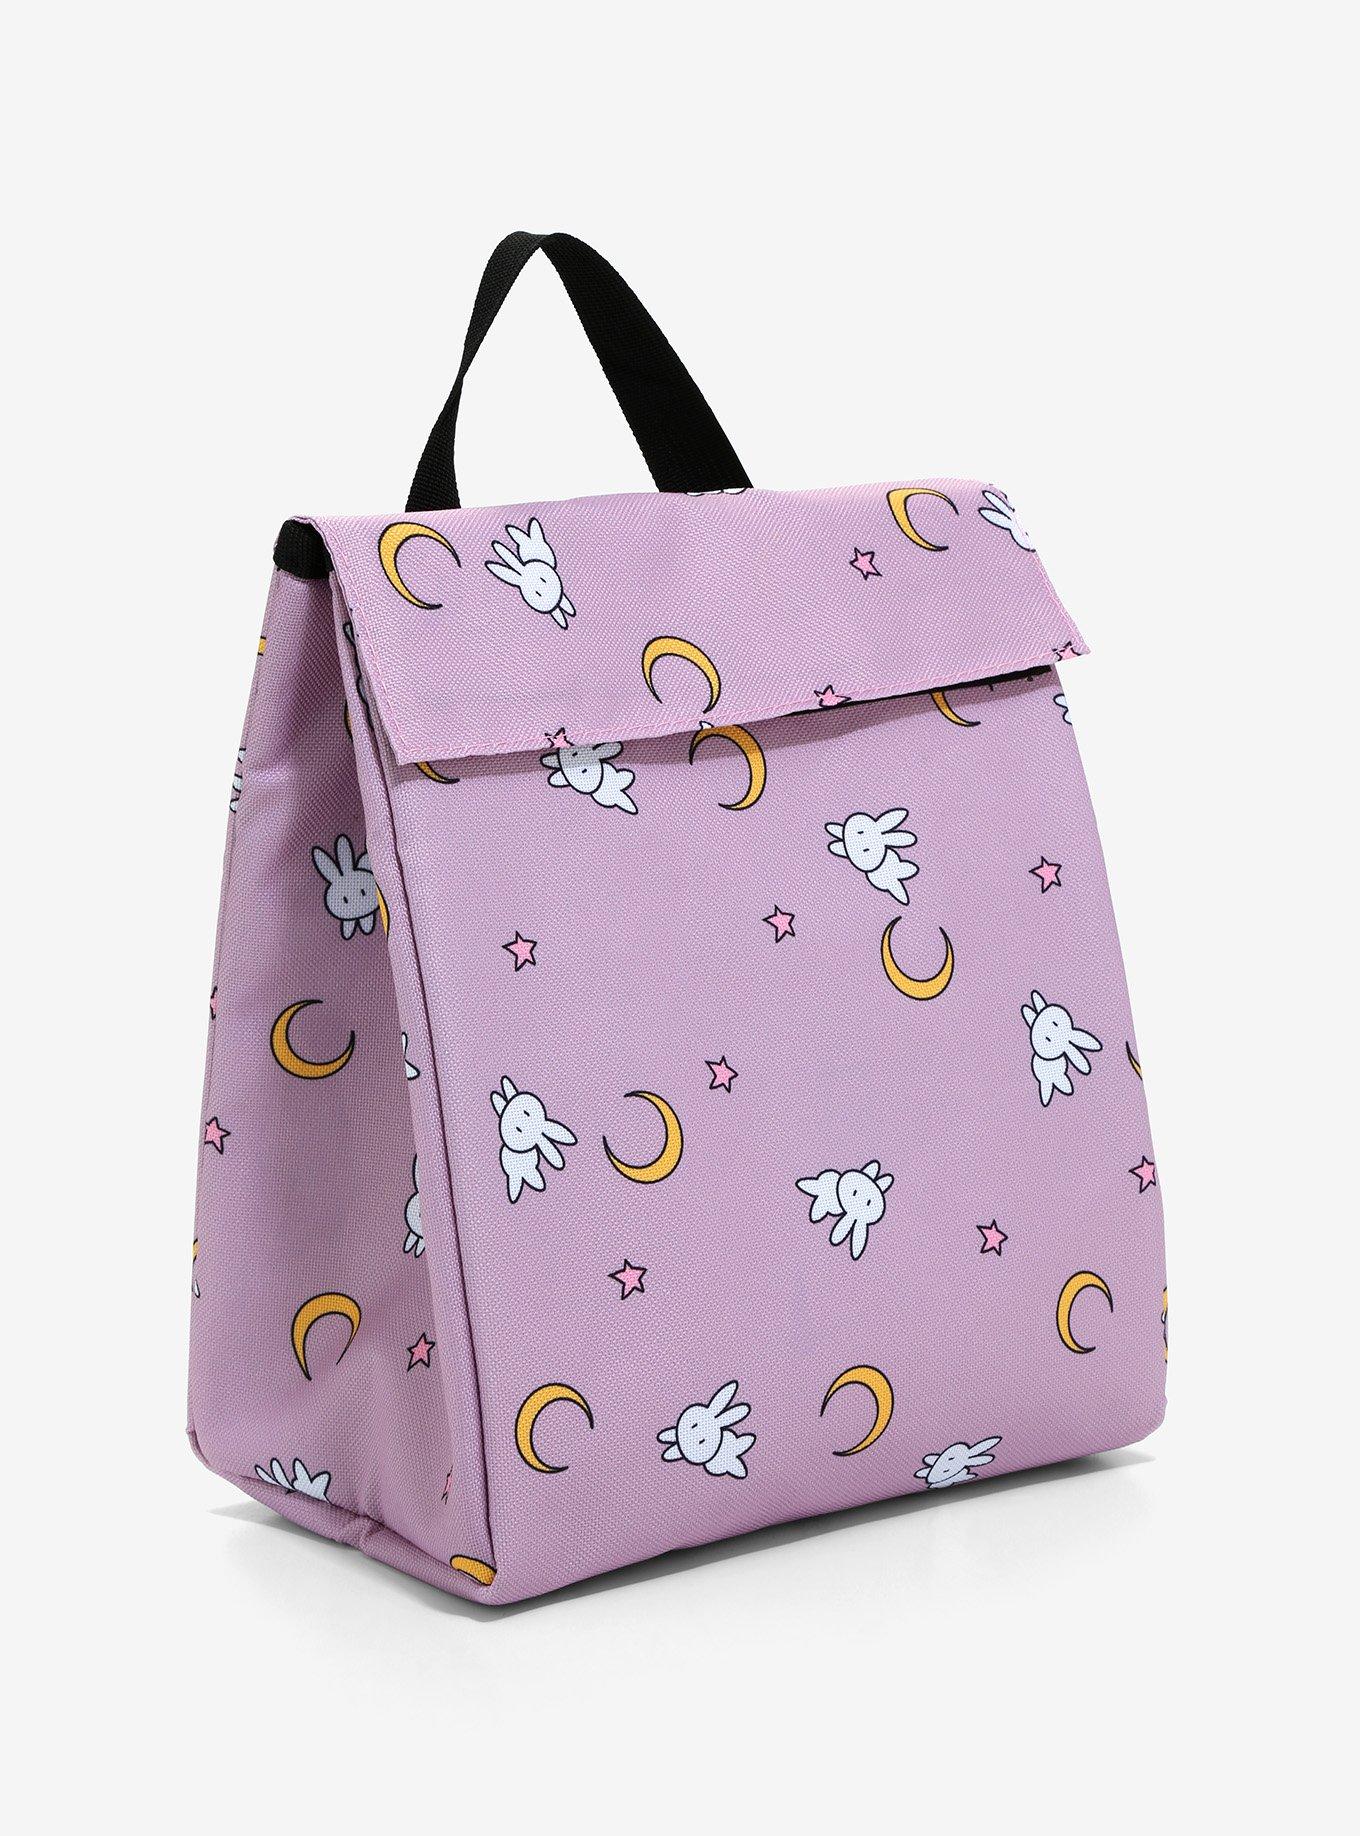 Sailor Moon Merch Insulated Lunch Box Bag Tote For Men Women